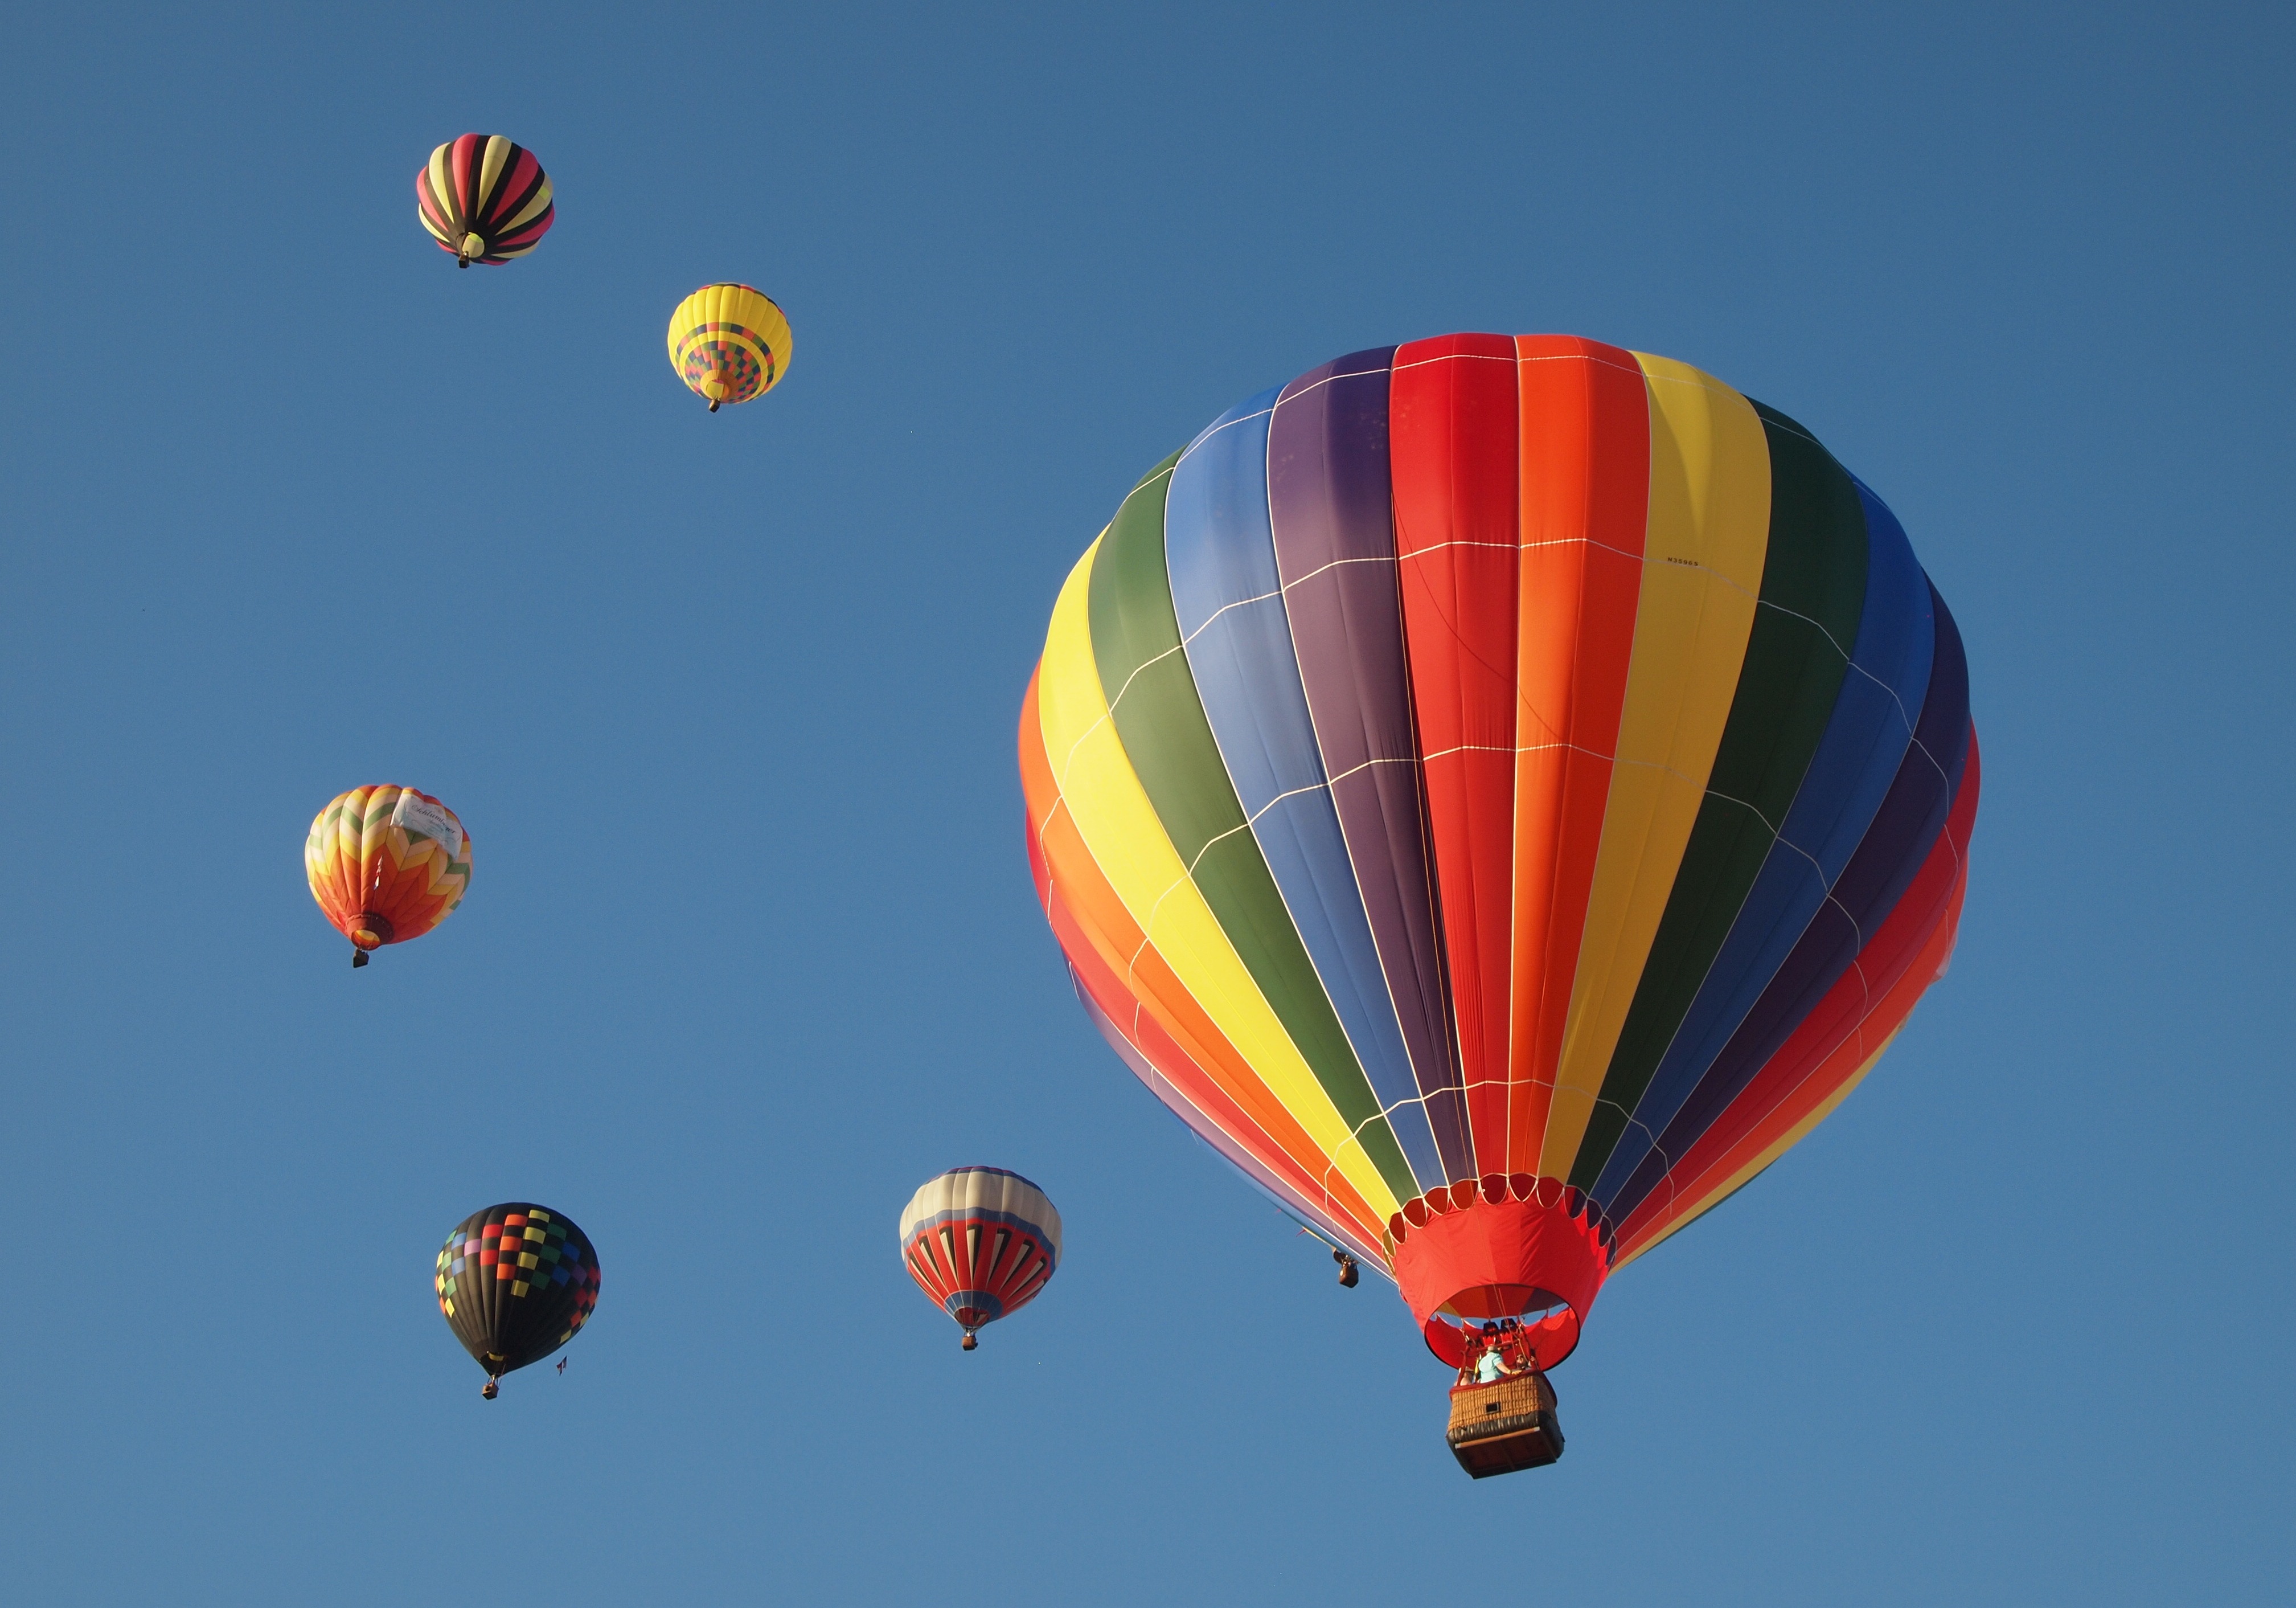 Come experience the magic of ballooning